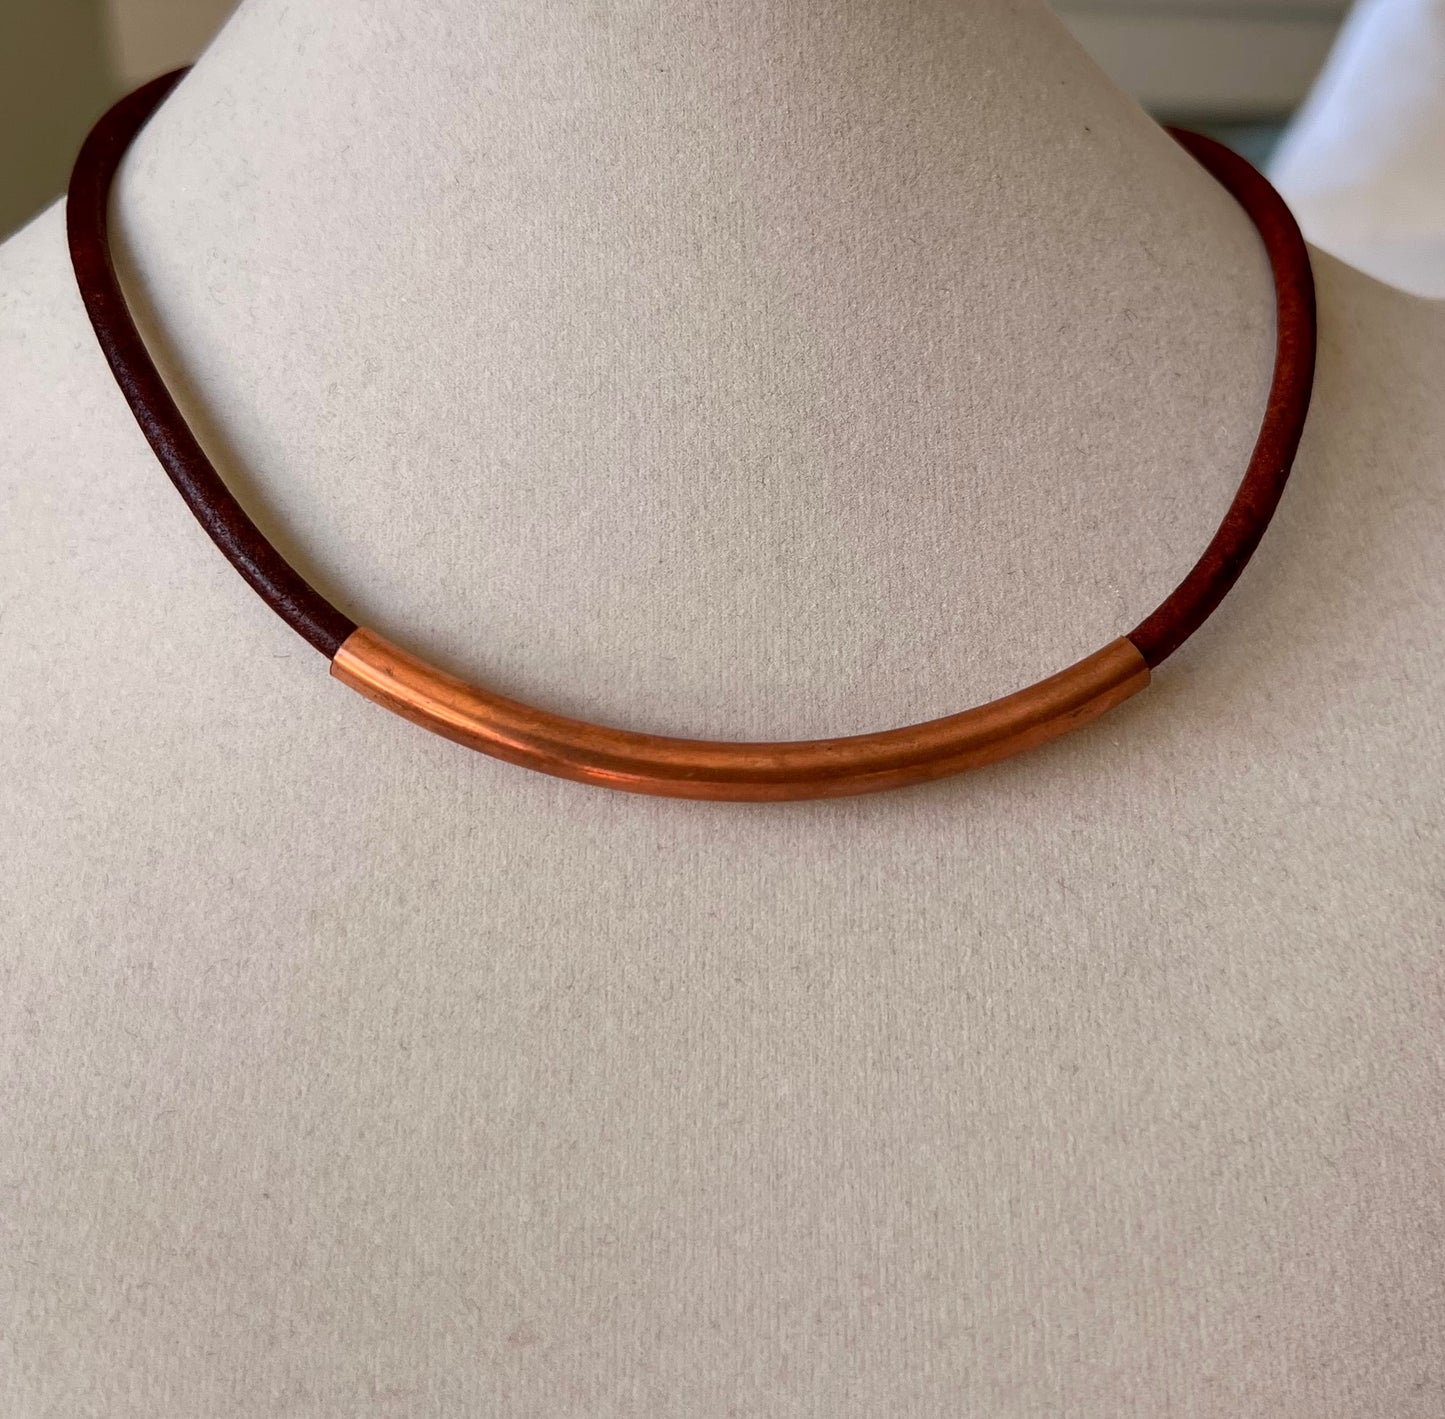 Leather Necklace  Beautiful rich brown Italian leather with center copper tube. Fixed with a copper magnetic clasp. 16.5" long.